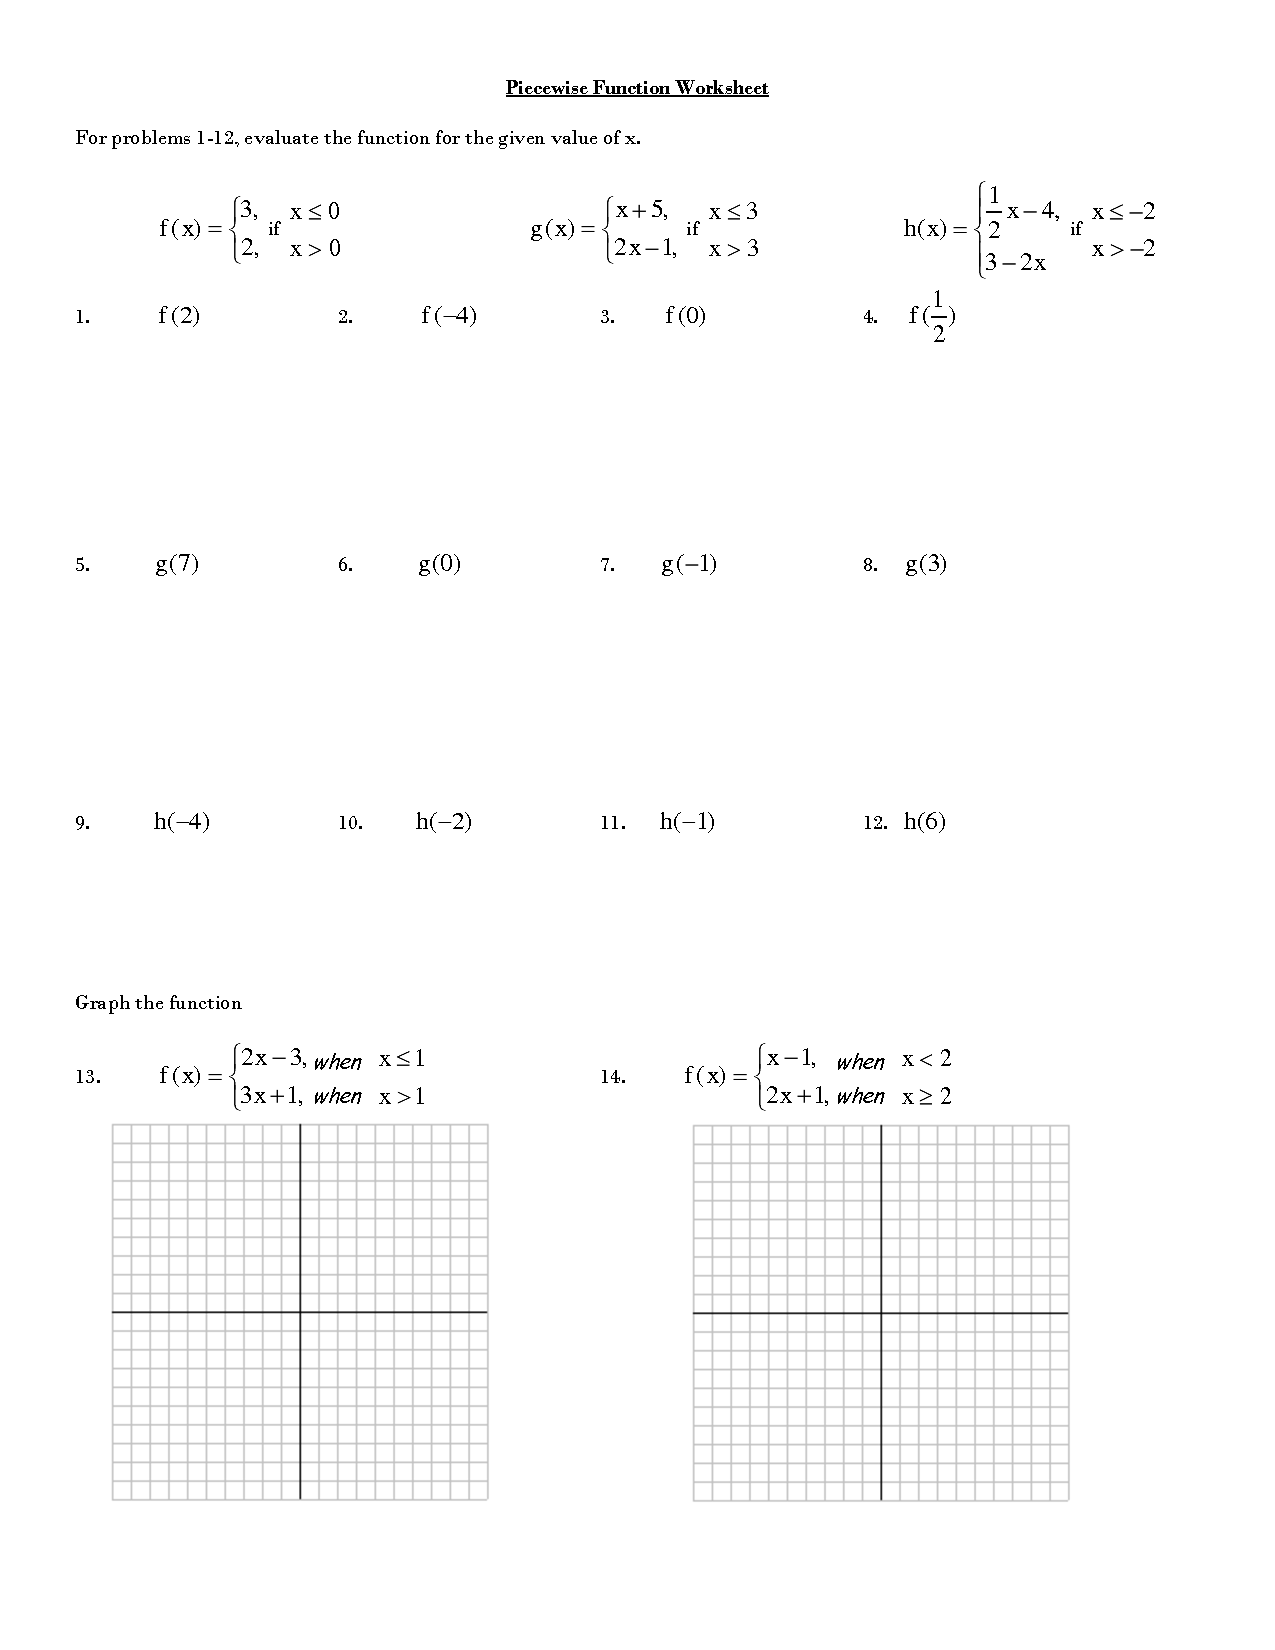 Function Notation And Evaluating Functions Practice Worksheet Answers Key